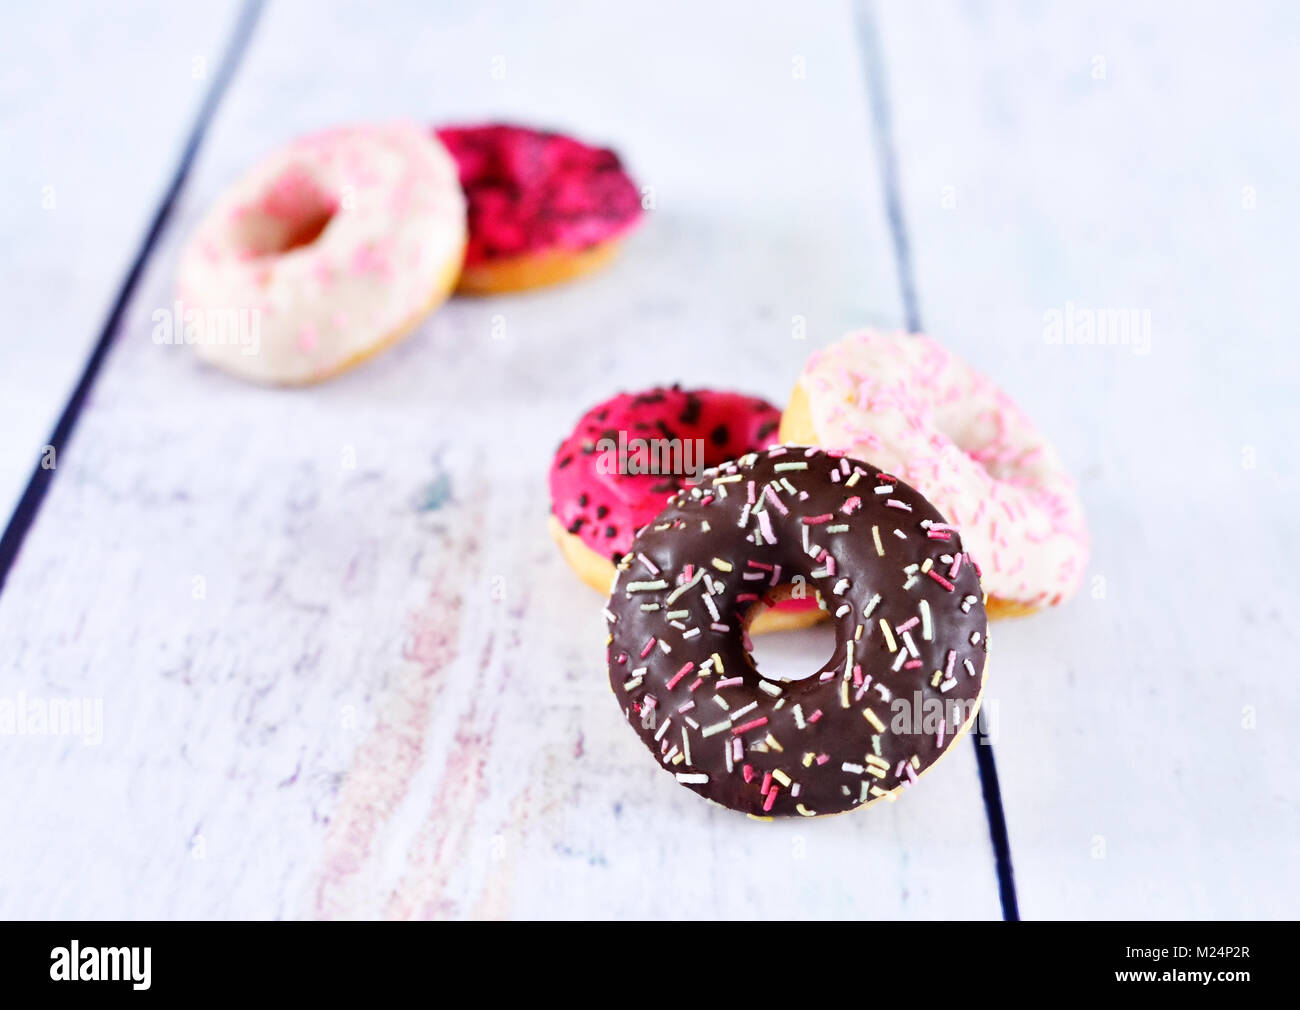 delicious donuts with glaze or icing and sprinkles. variation of fresh donuts on a white wooden table. Arrangement with copy space. Stock Photo